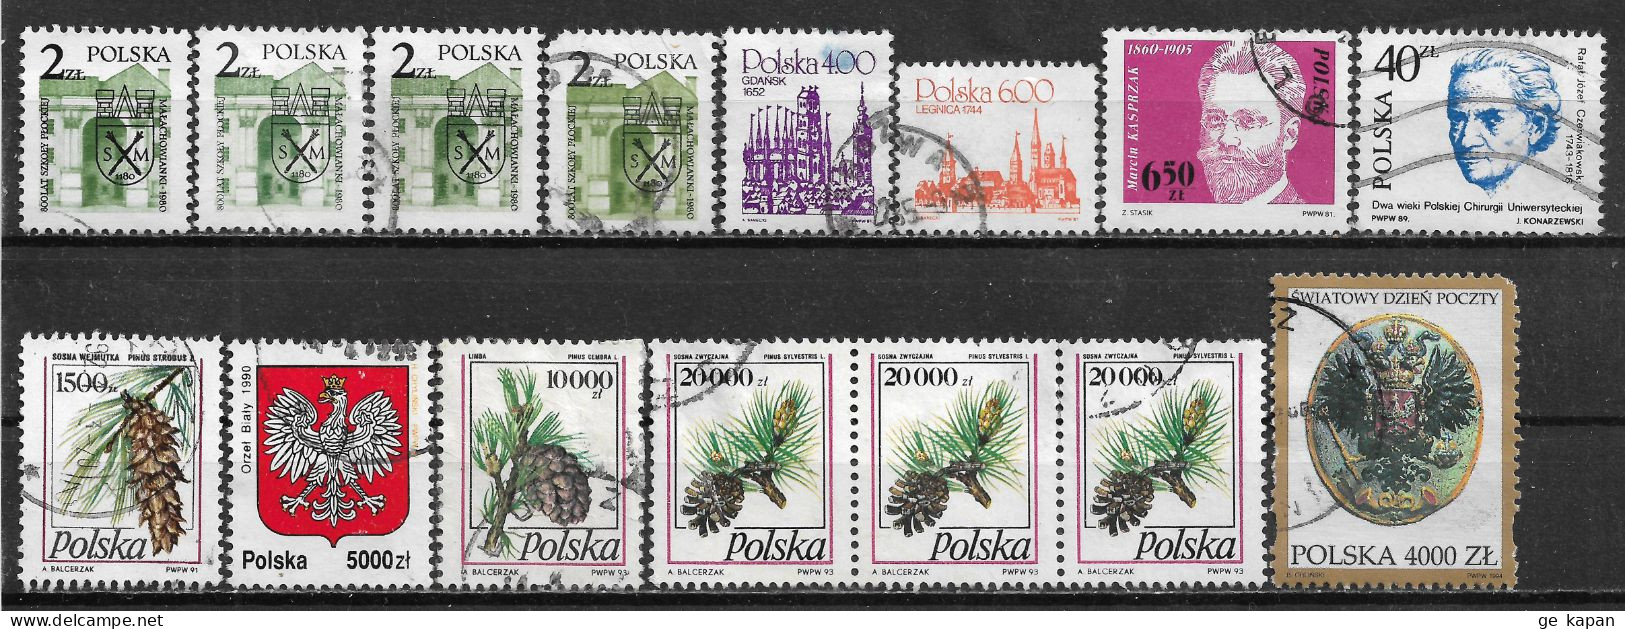 1980-1994 POLAND Lot Of 15 Used Stamps MICHEL CV €11.90 - Used Stamps